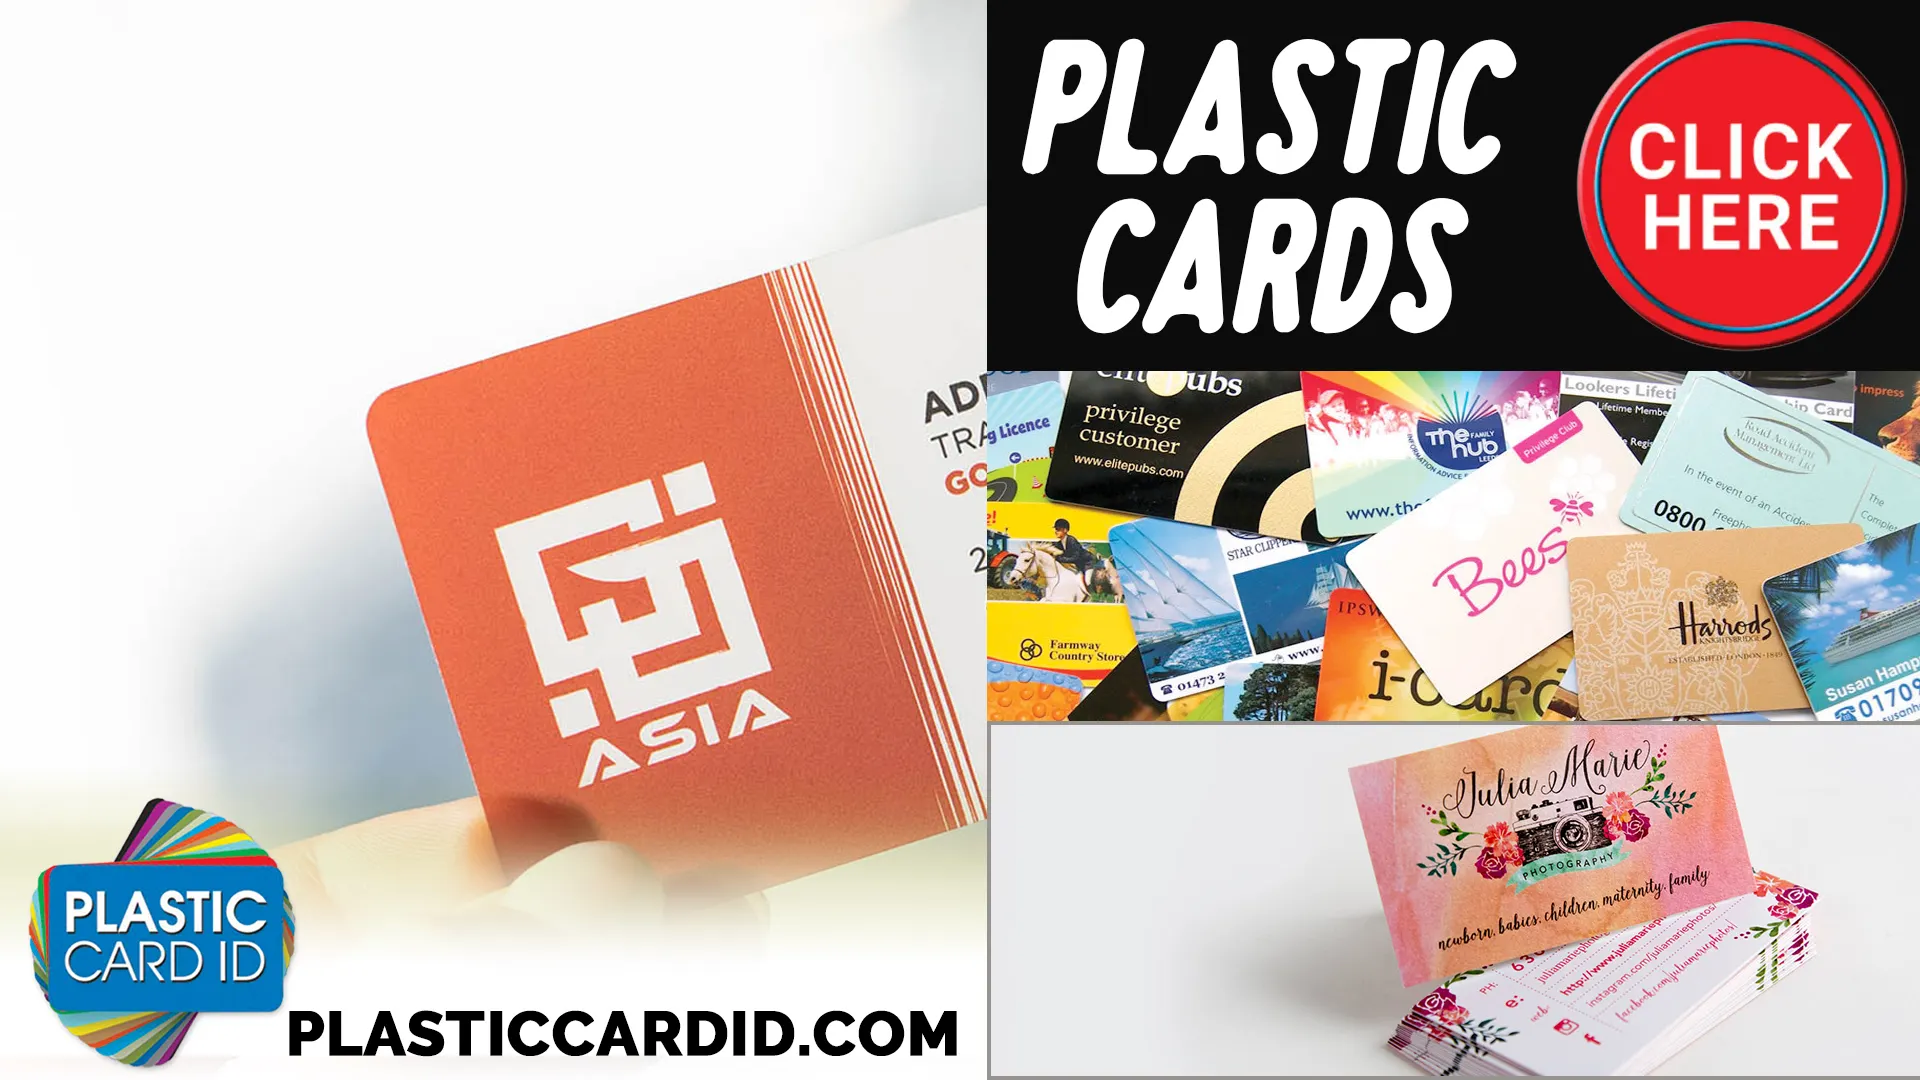 Welcome to Plastic Card ID
: The Epitome of Efficient Card Printing